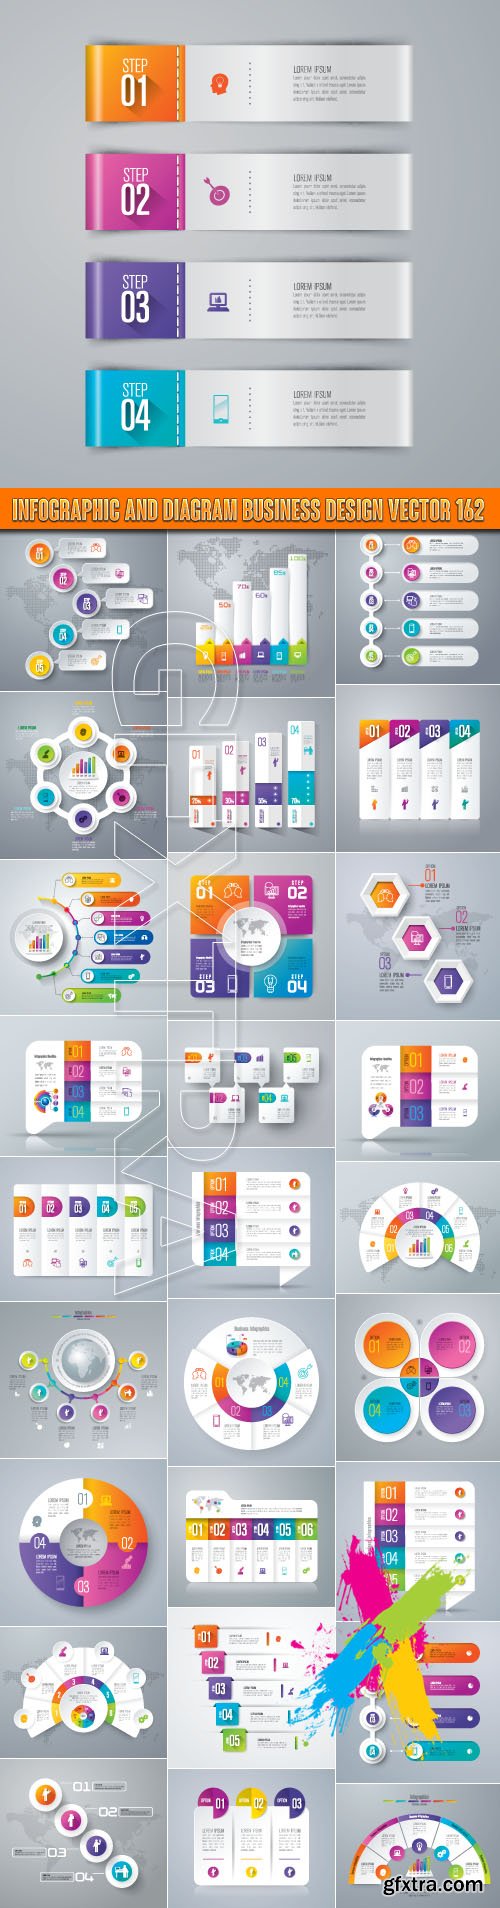 Infographic and diagram business design vector 162